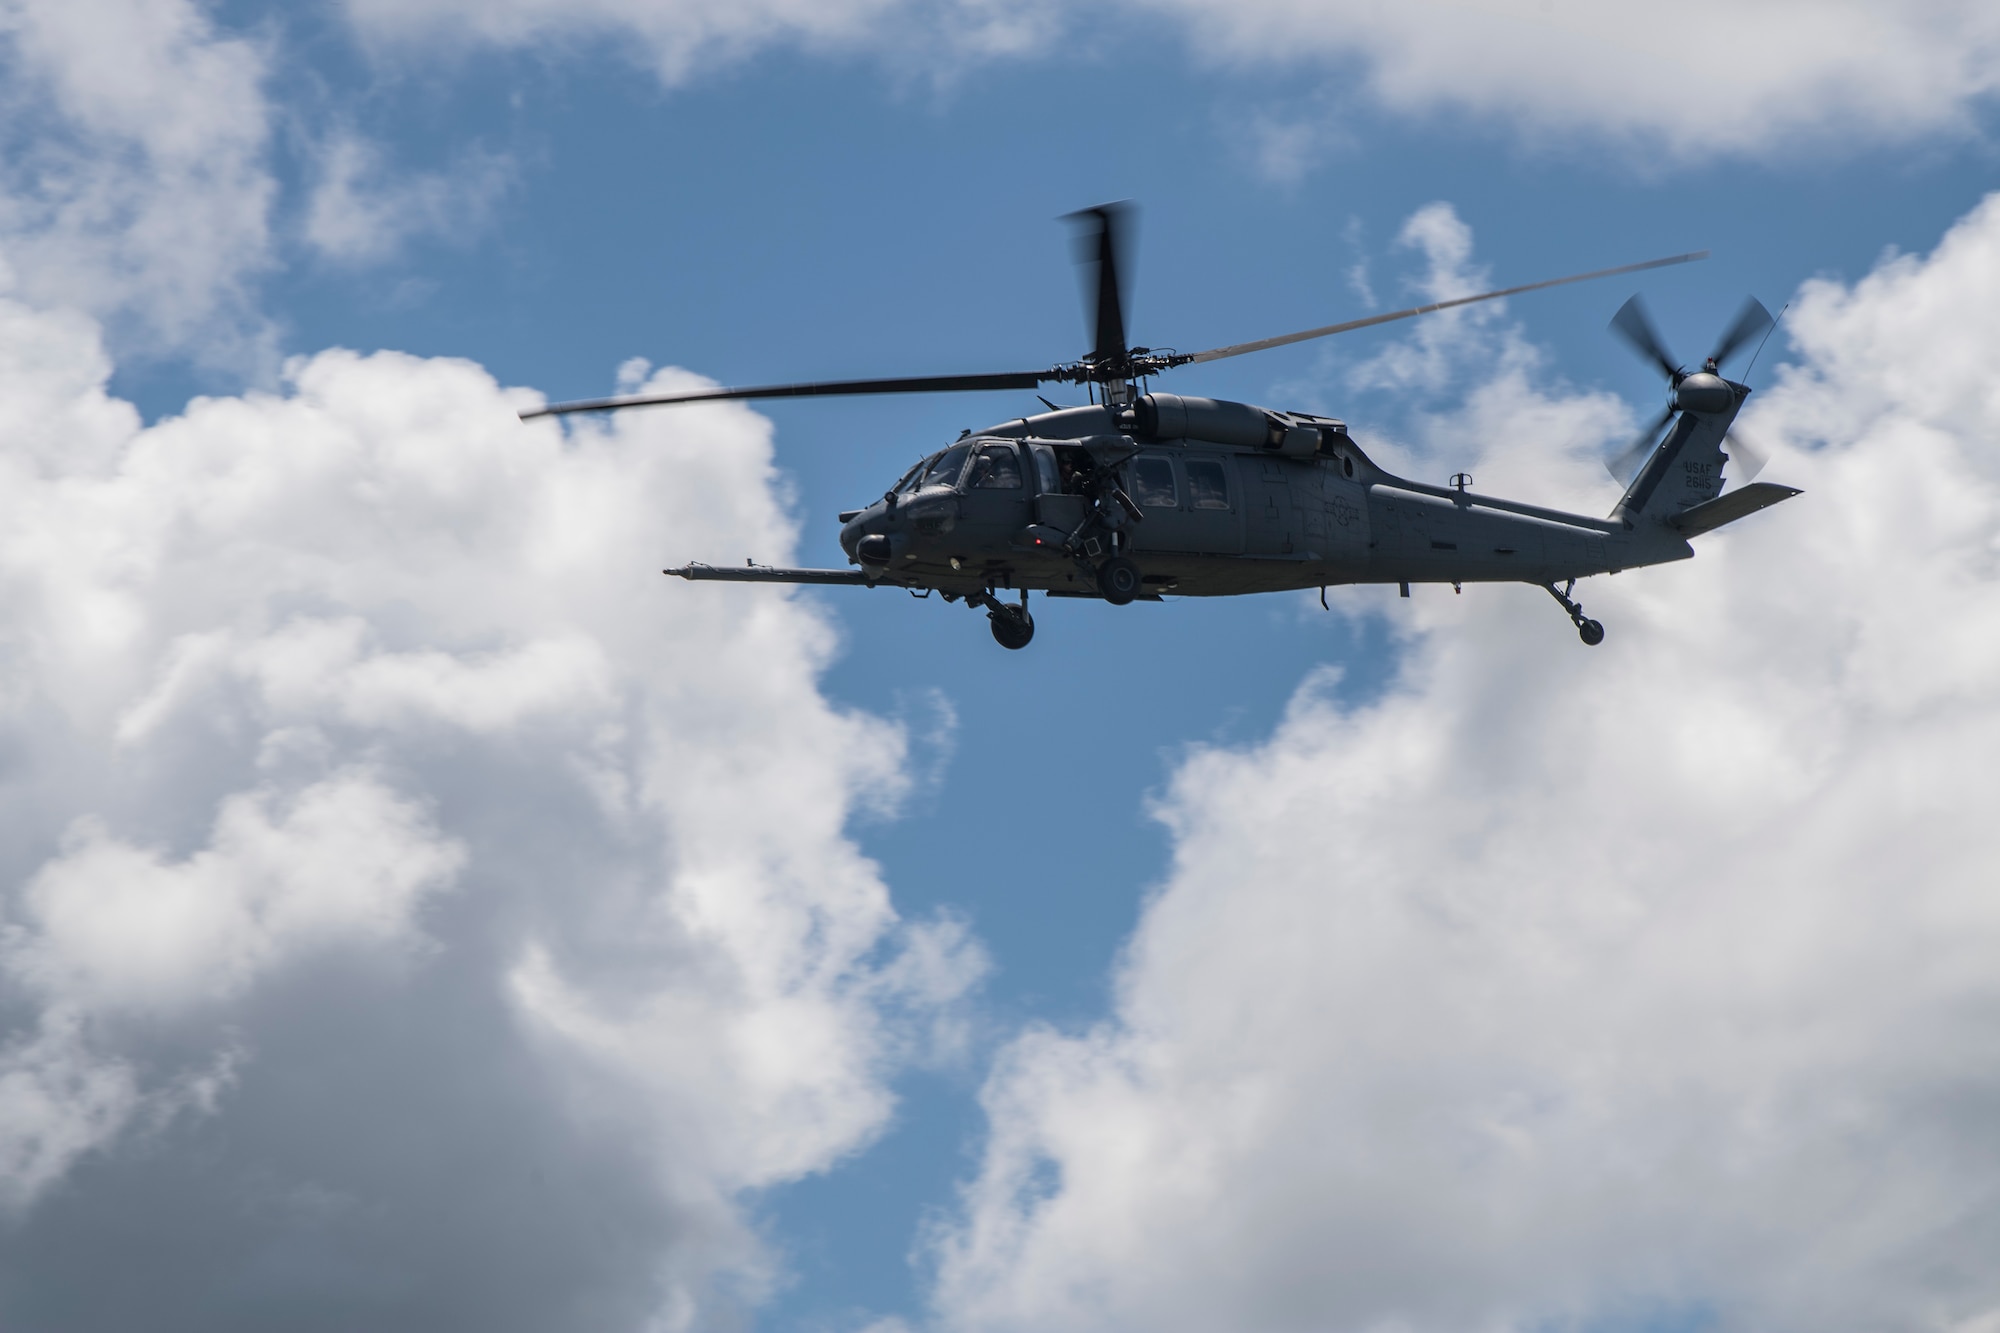 An HH-60 Pave Hawk helicopter hovers in side profile against a backdrop of white clouds in a blue sky.